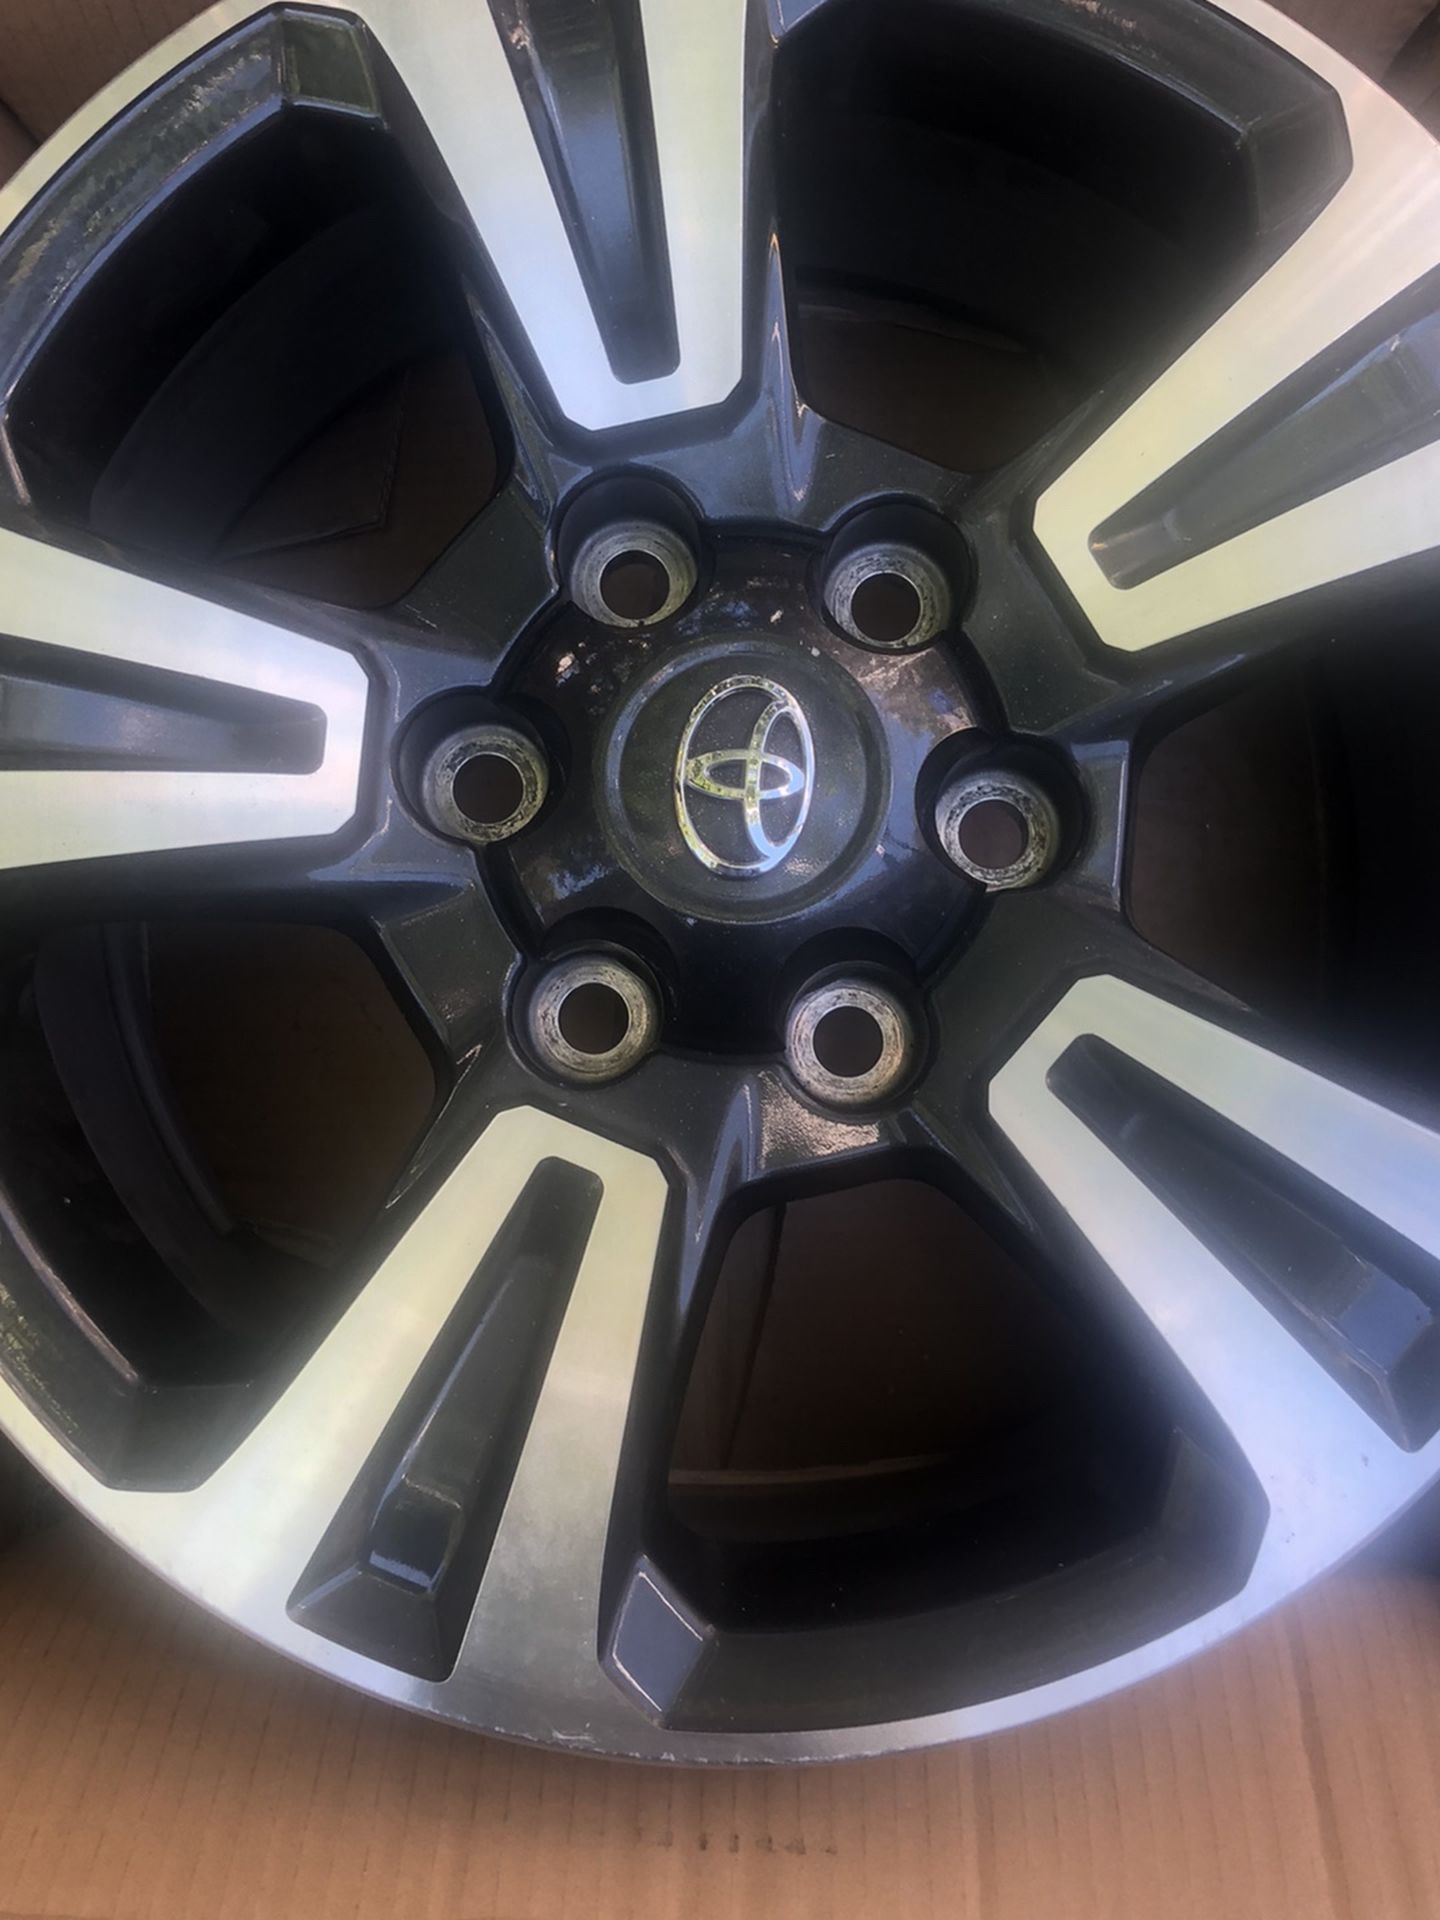 4 RIMS TRD STOCK TOYOTA SIZE 17 THEY FIT TACOMA SEQUOIA 4RUNNER 6!LUGS GREAT CONDITION 9/10